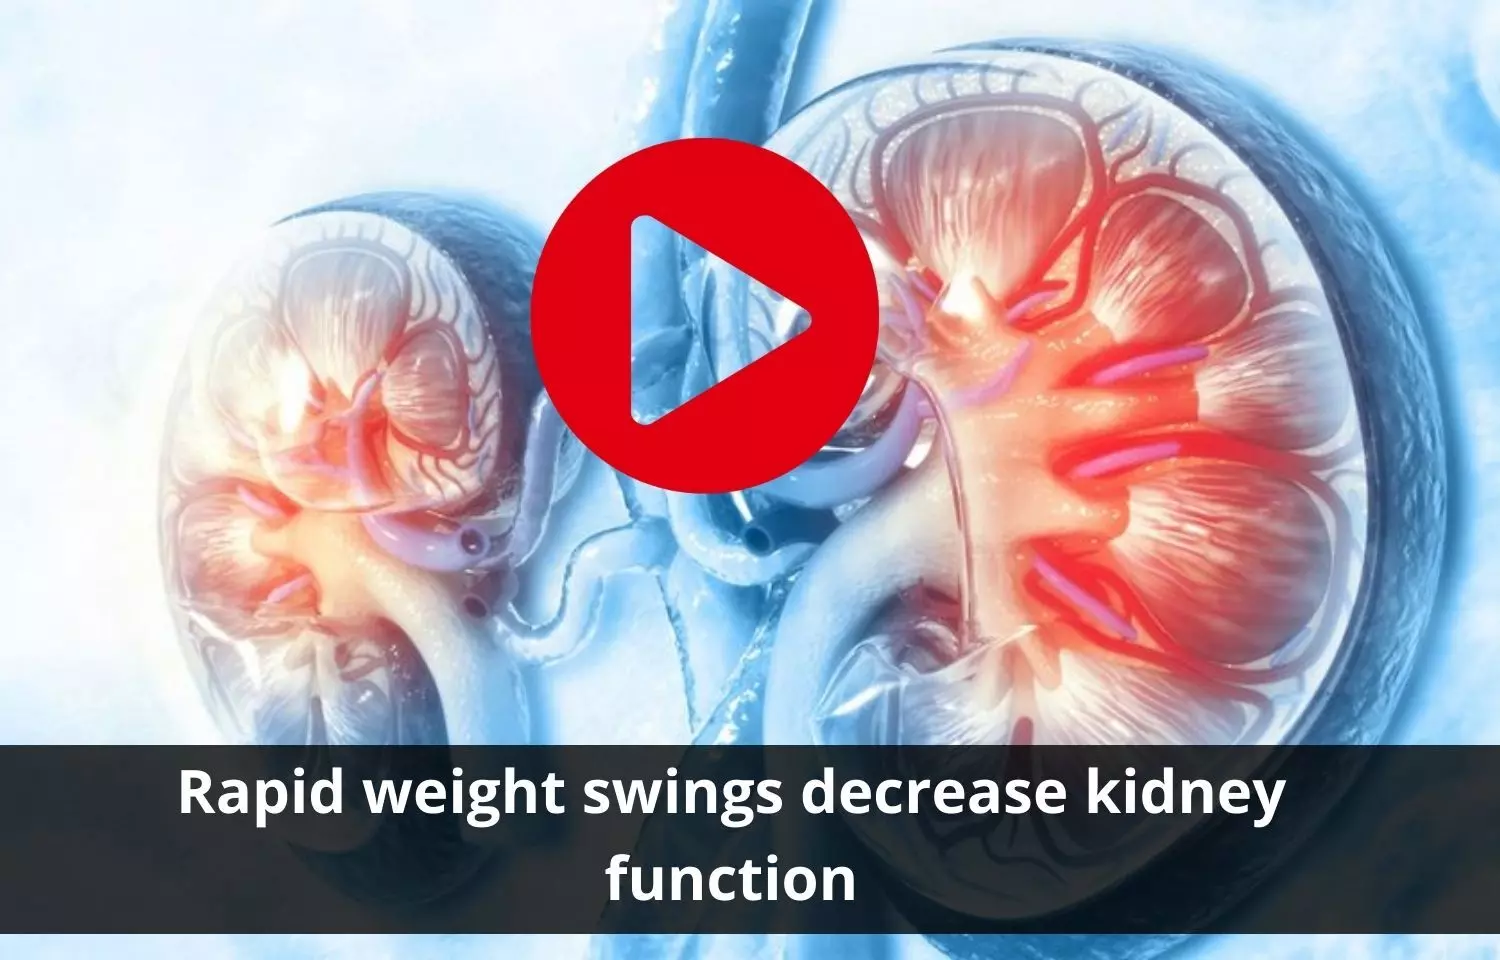 Weight fluctuation to adversely affect kidney function